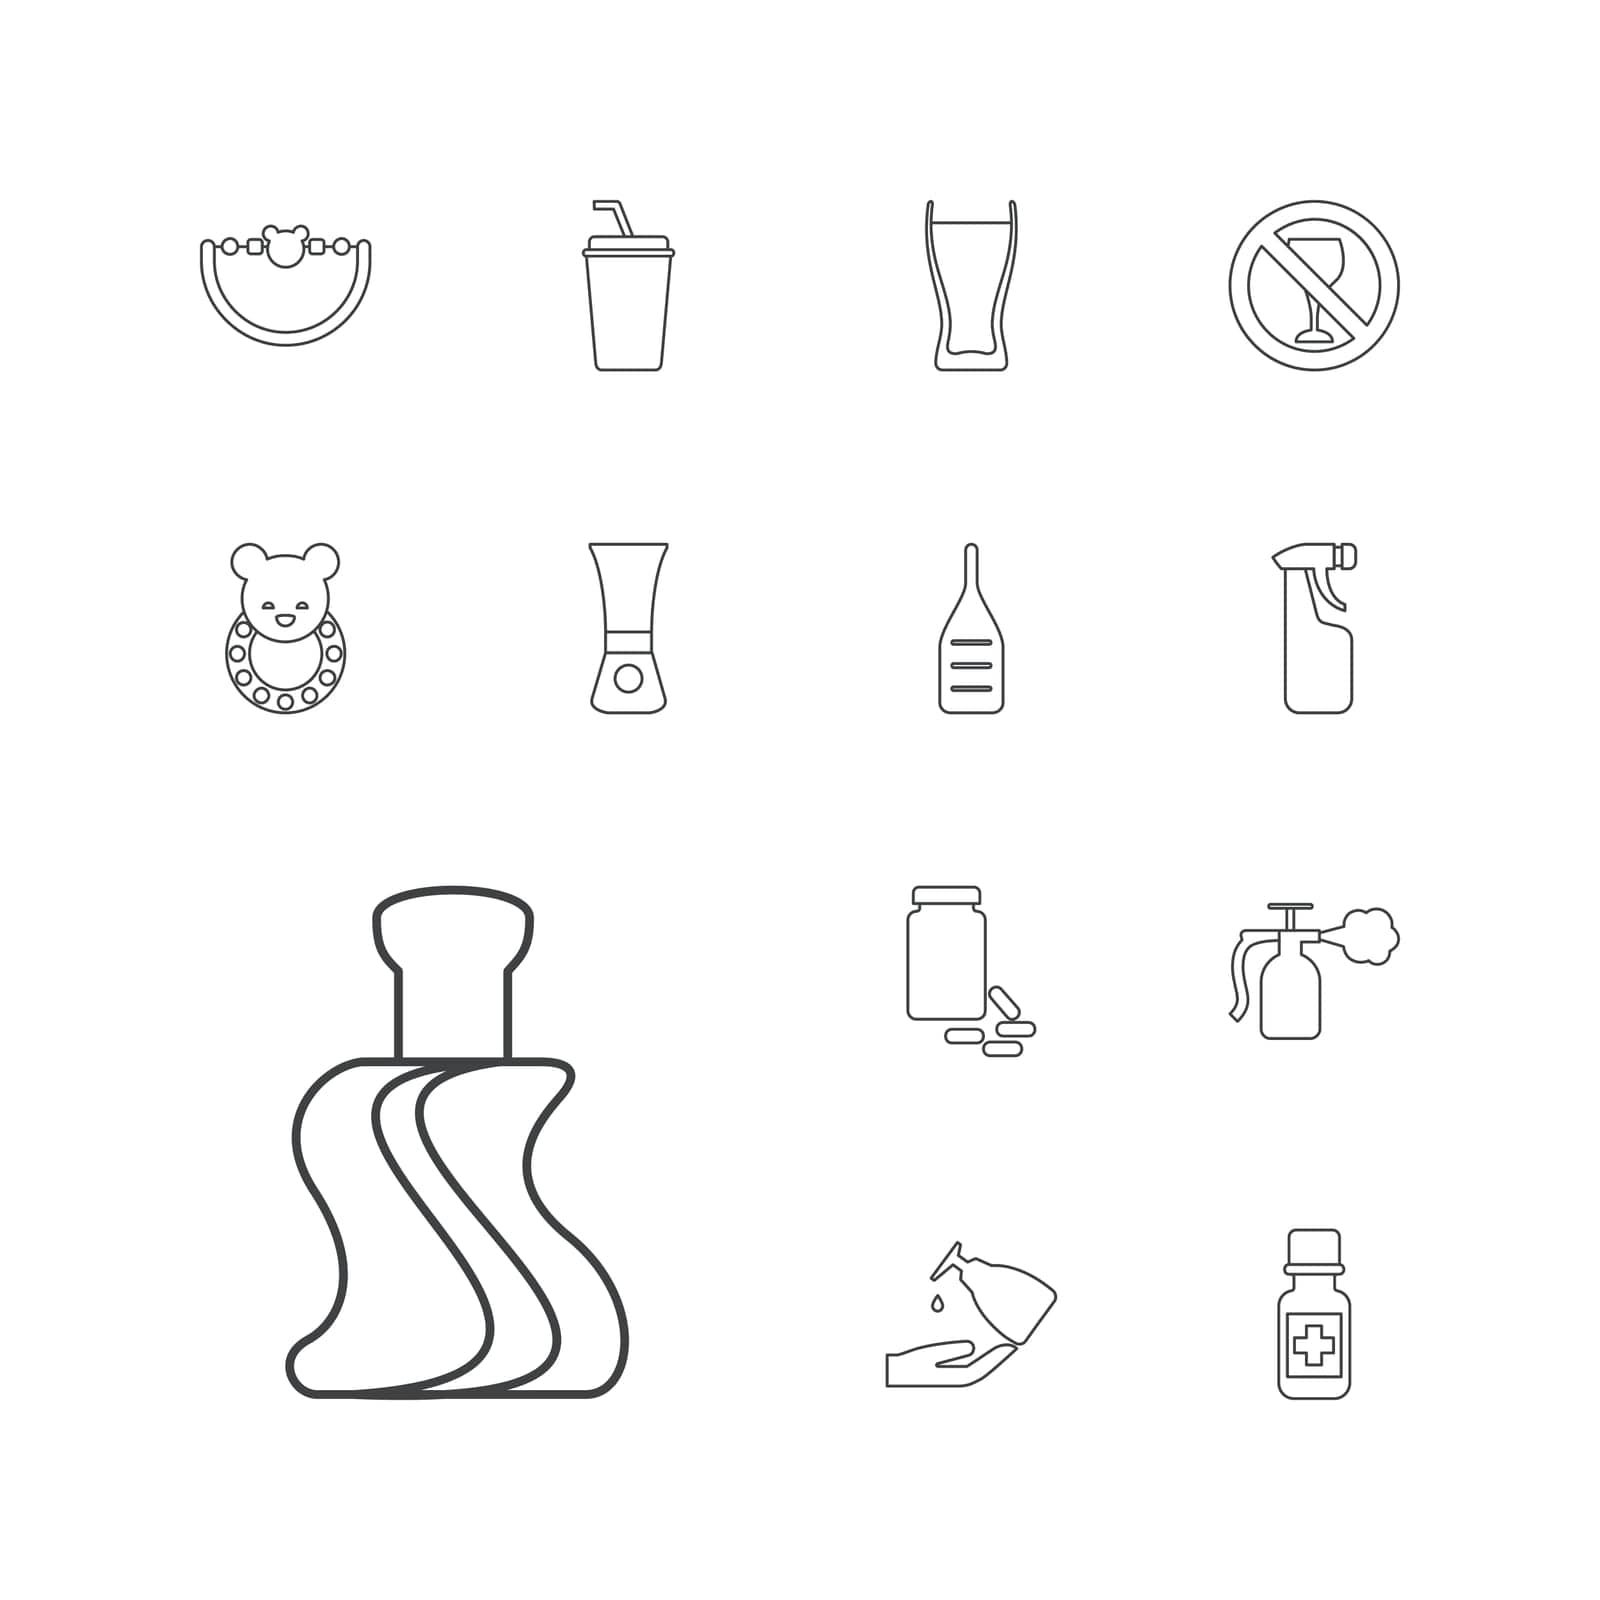 container,symbol,no,icon,sign,isolated,bottle,white,flat,fitness,design,beverage,vector,graphic,beer,element,toy,alcohol,glass,set,spray,nail,black,health,cream,medicine,drink,cleanser,plastic,tube,liquid,background,silhouette,baby,illustration,polish,soap by ogqcorp